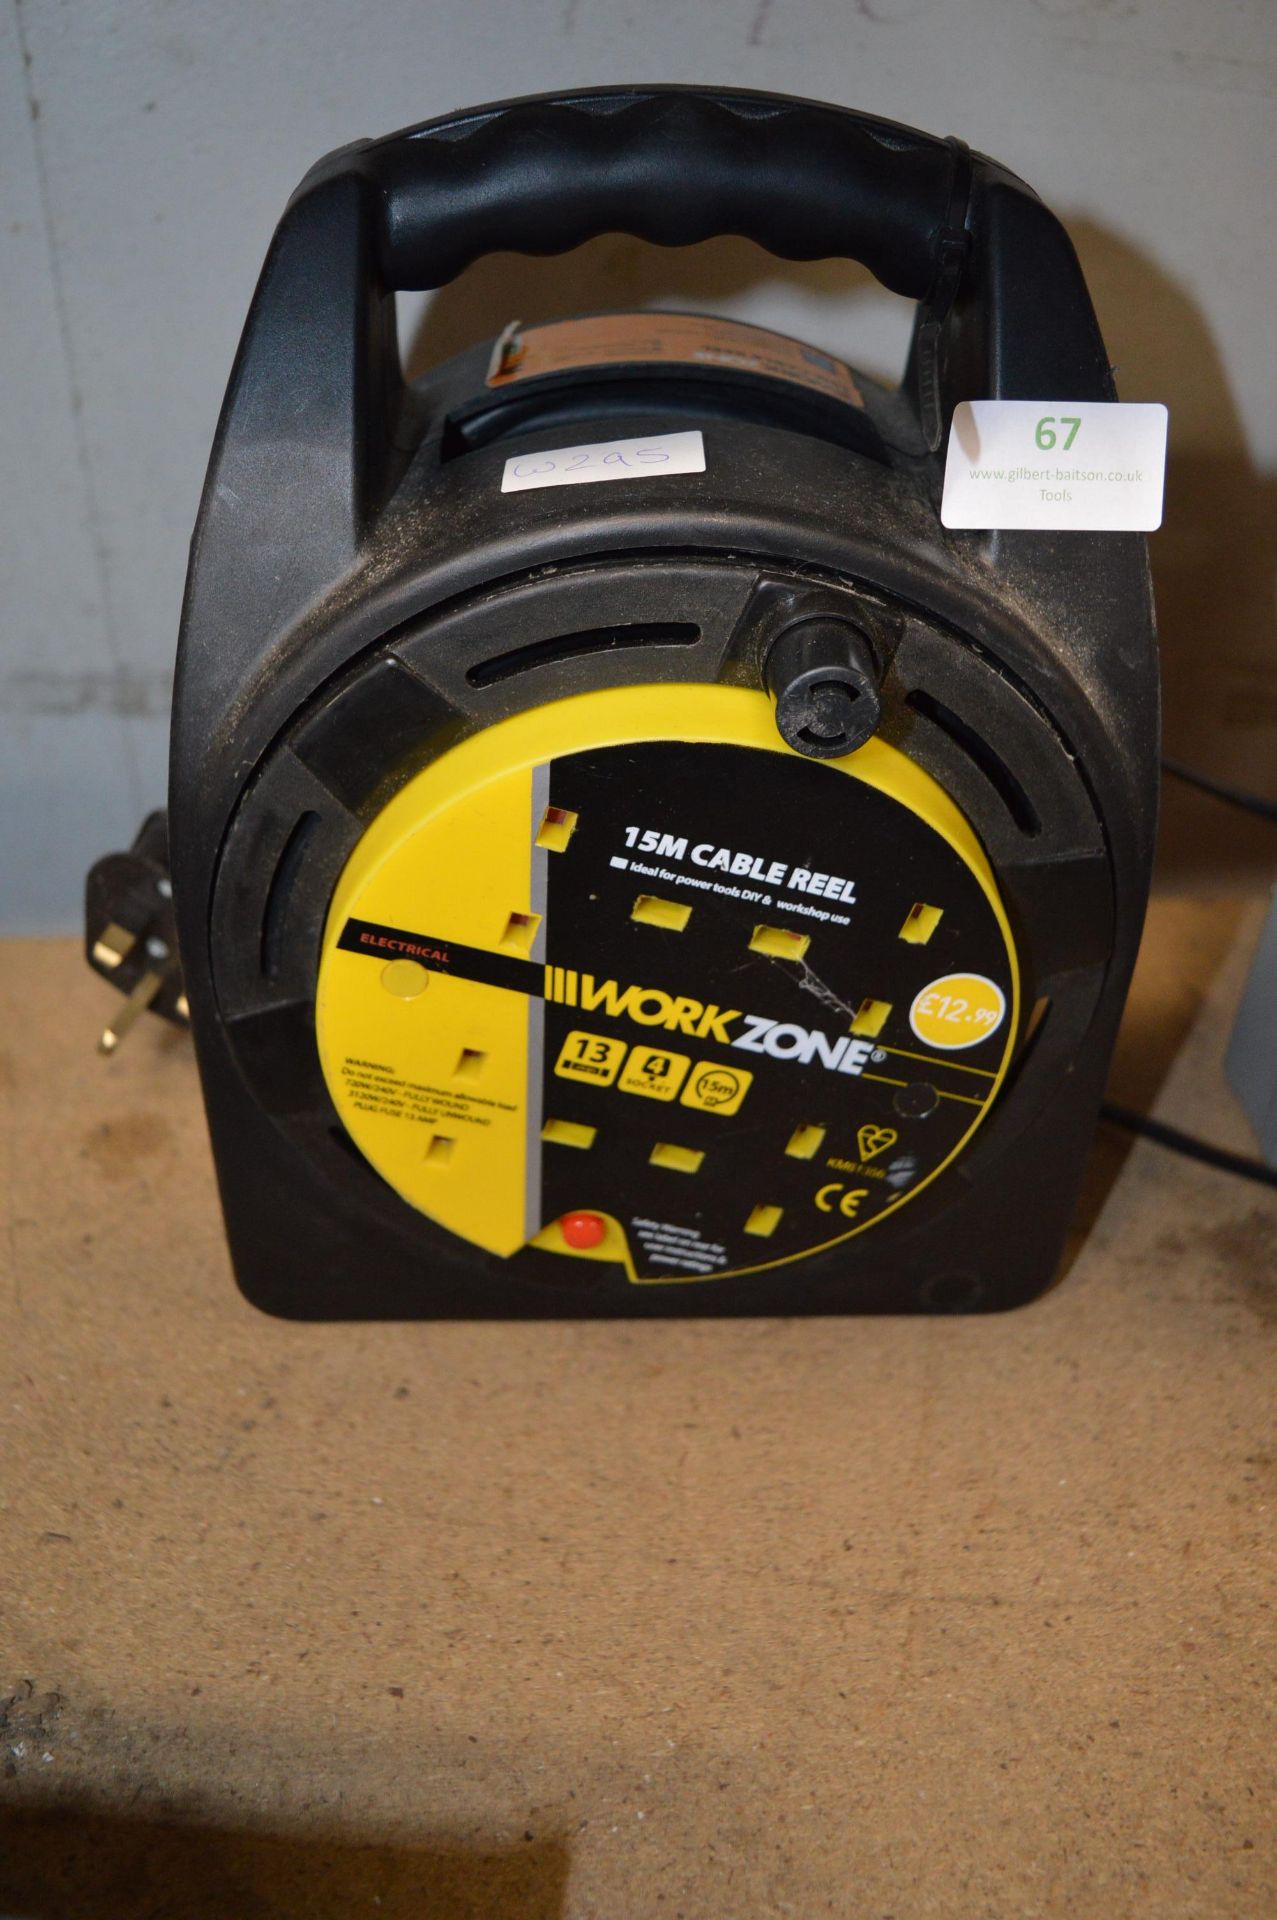 Work Zone 15m Cable Reel